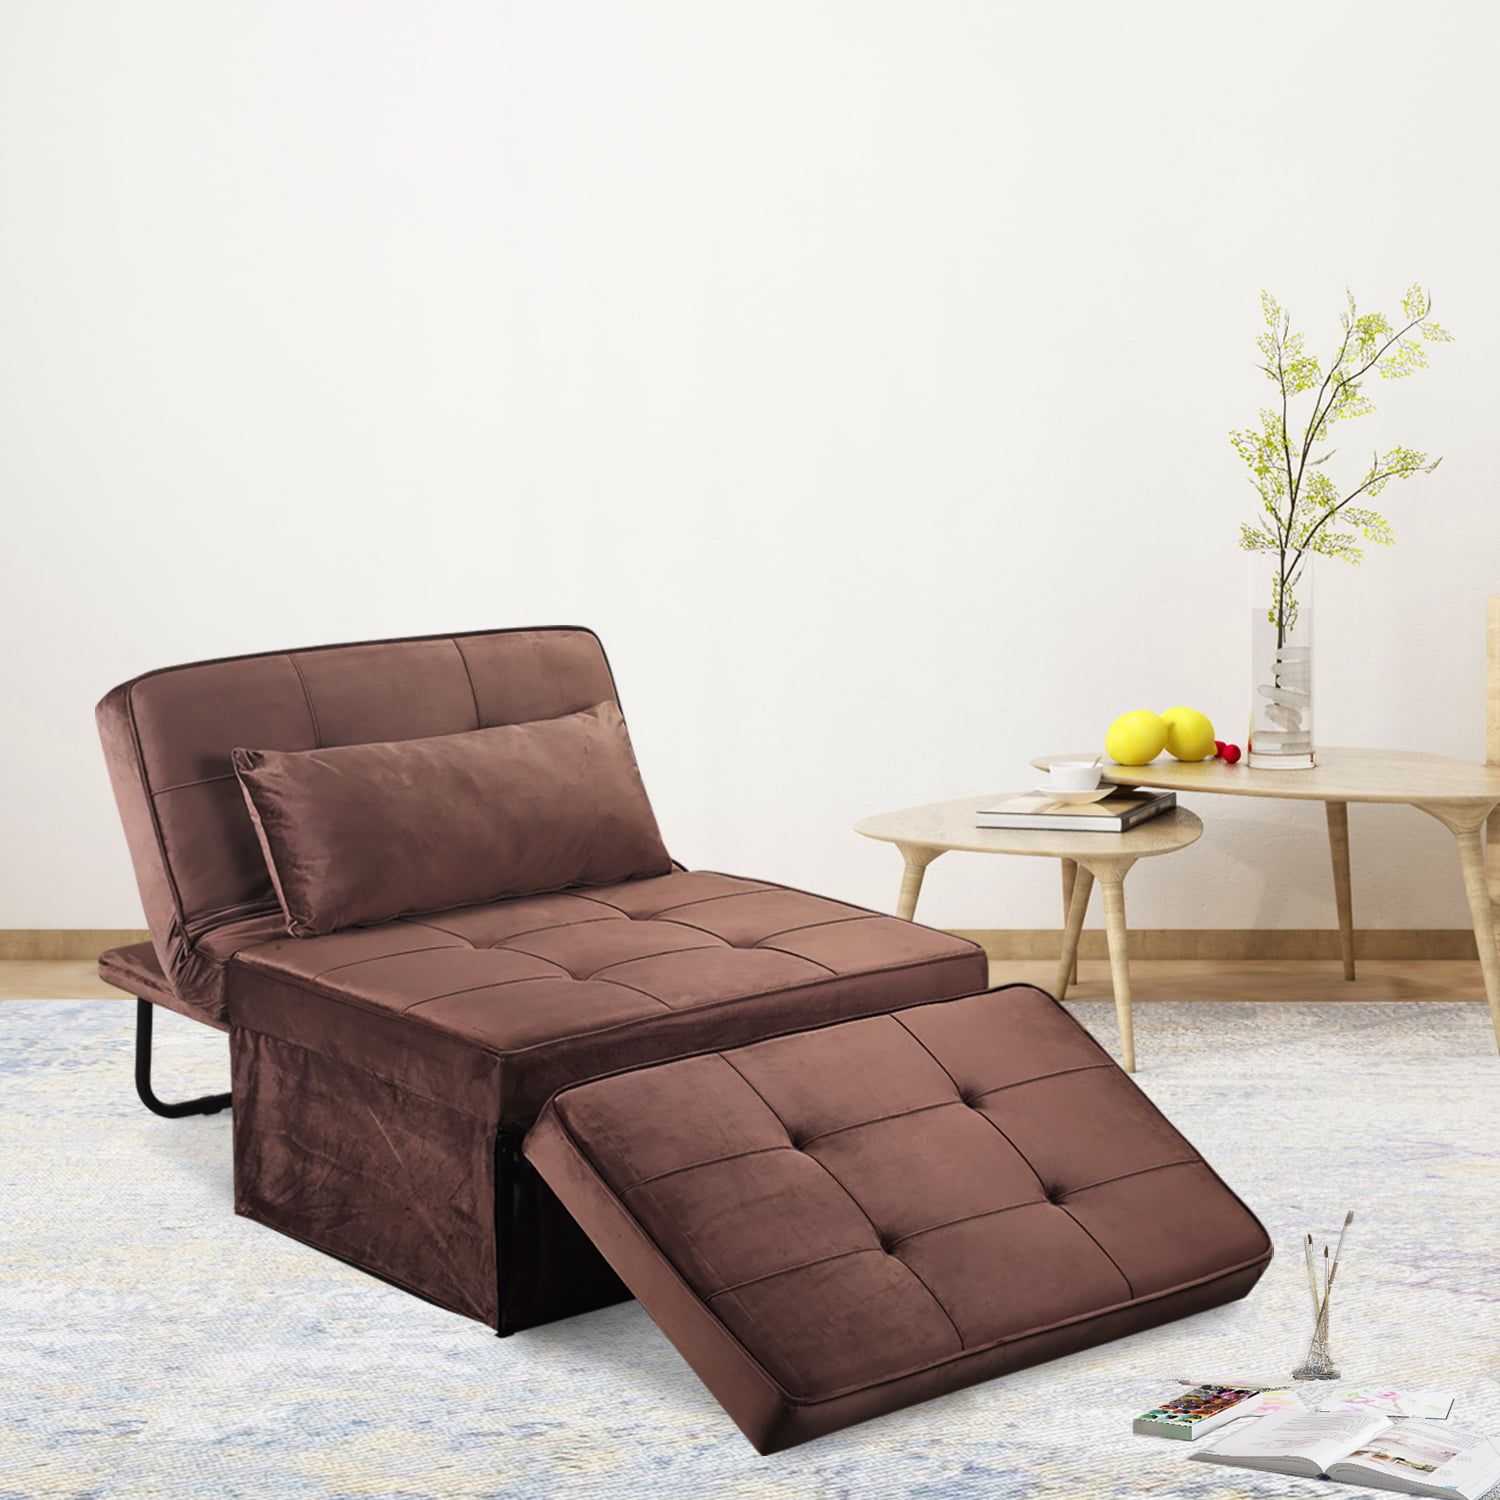 Ainfox 4 In 1 Ottoman Sleeper Guest Chair Sofa Bed Multi Function Pertaining To 4 In 1 Convertible Sleeper Chair Beds (View 4 of 20)